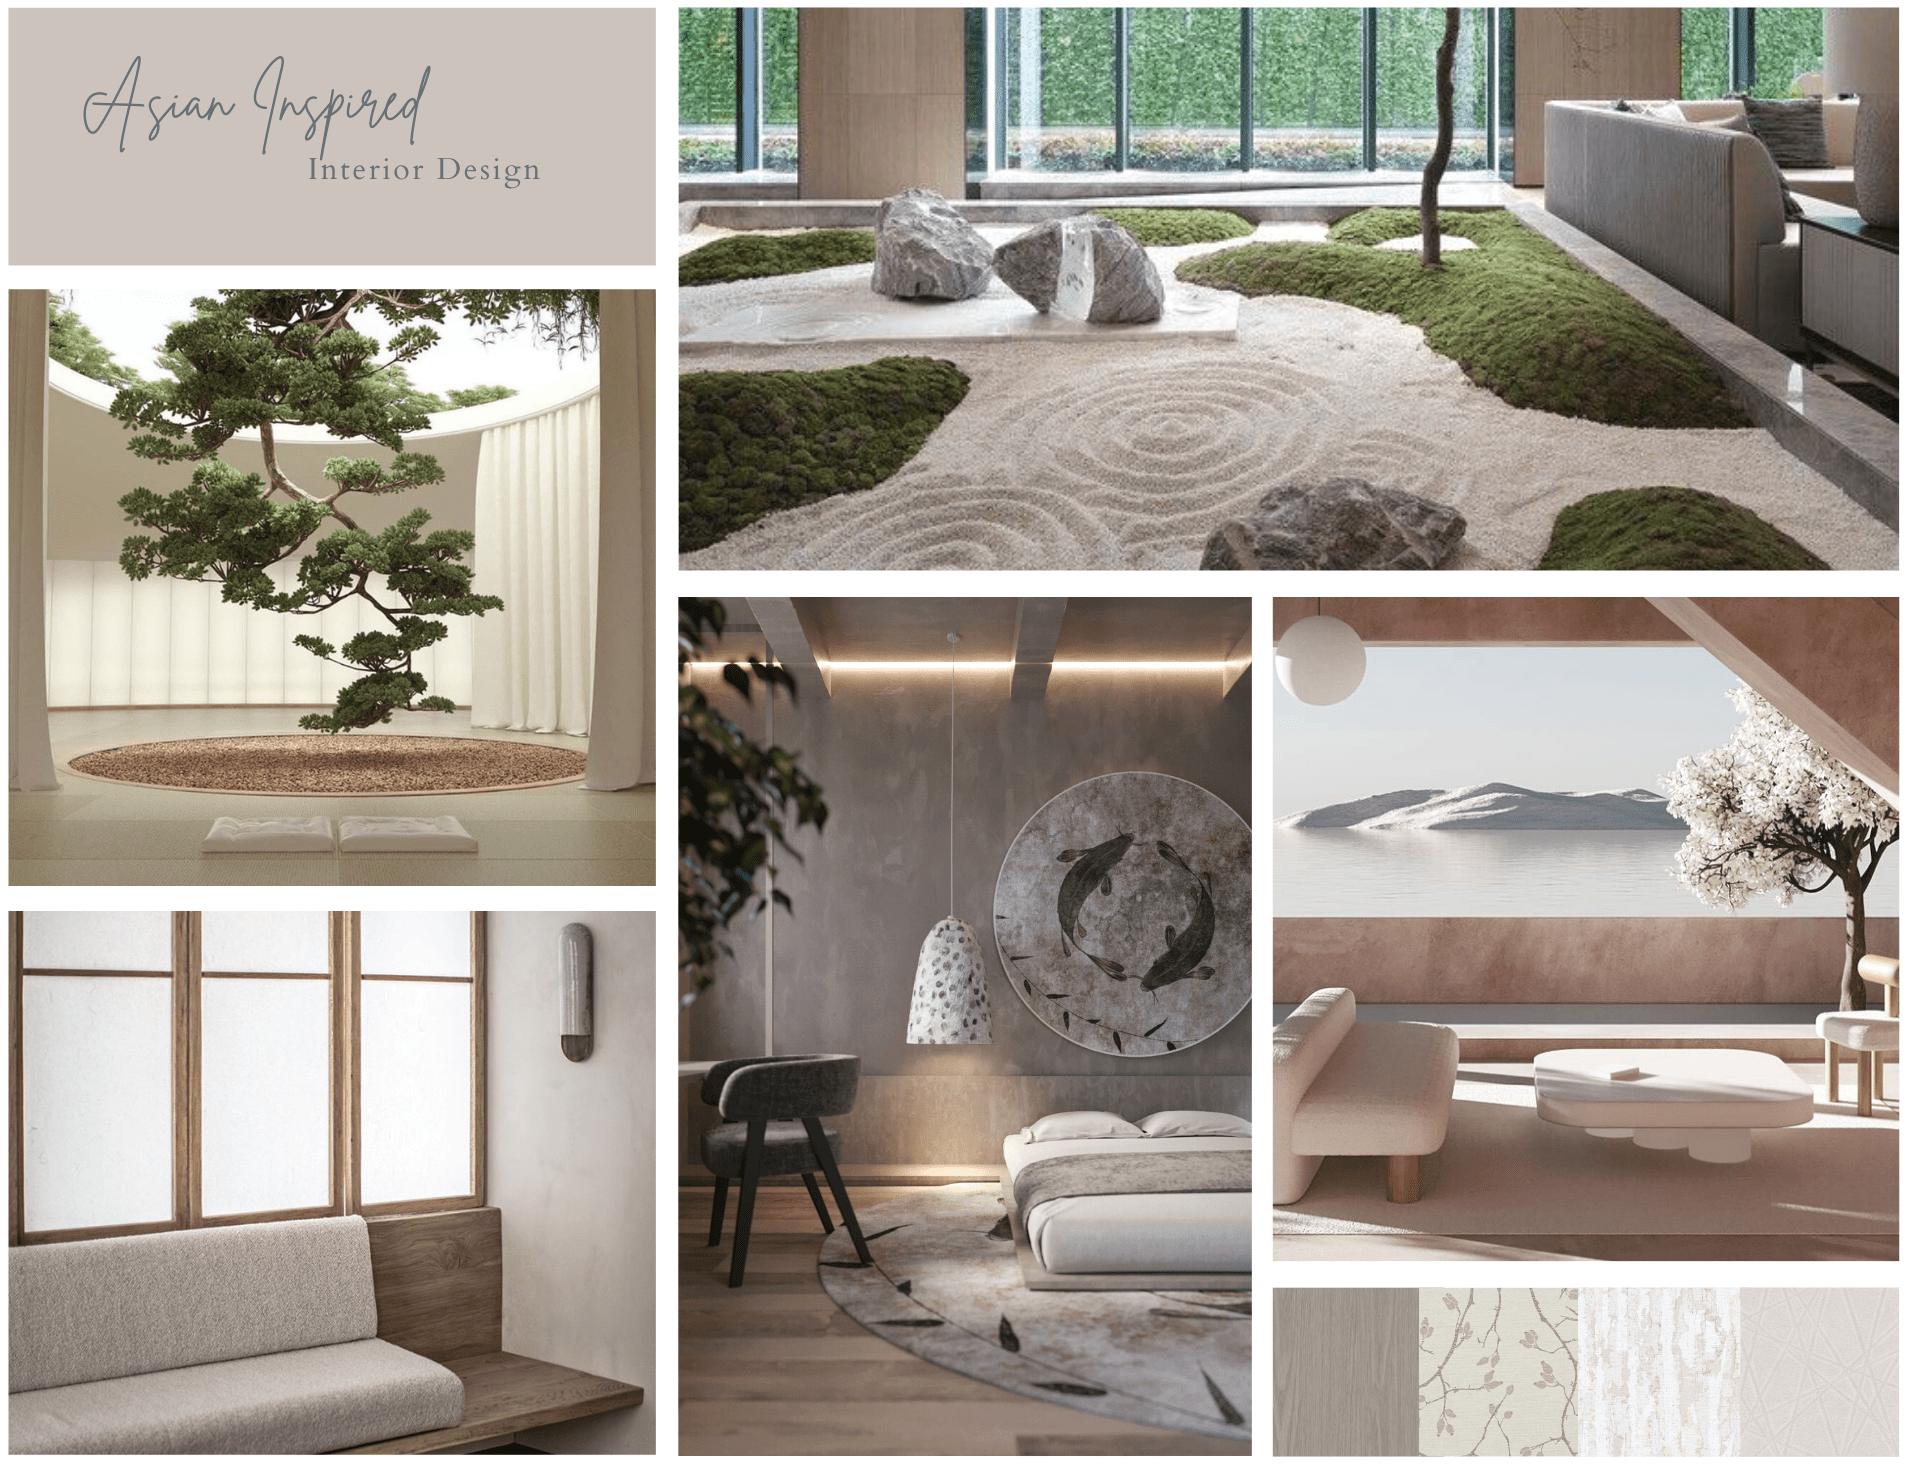 Inspired by Nature: Natural Elements in Interior Design